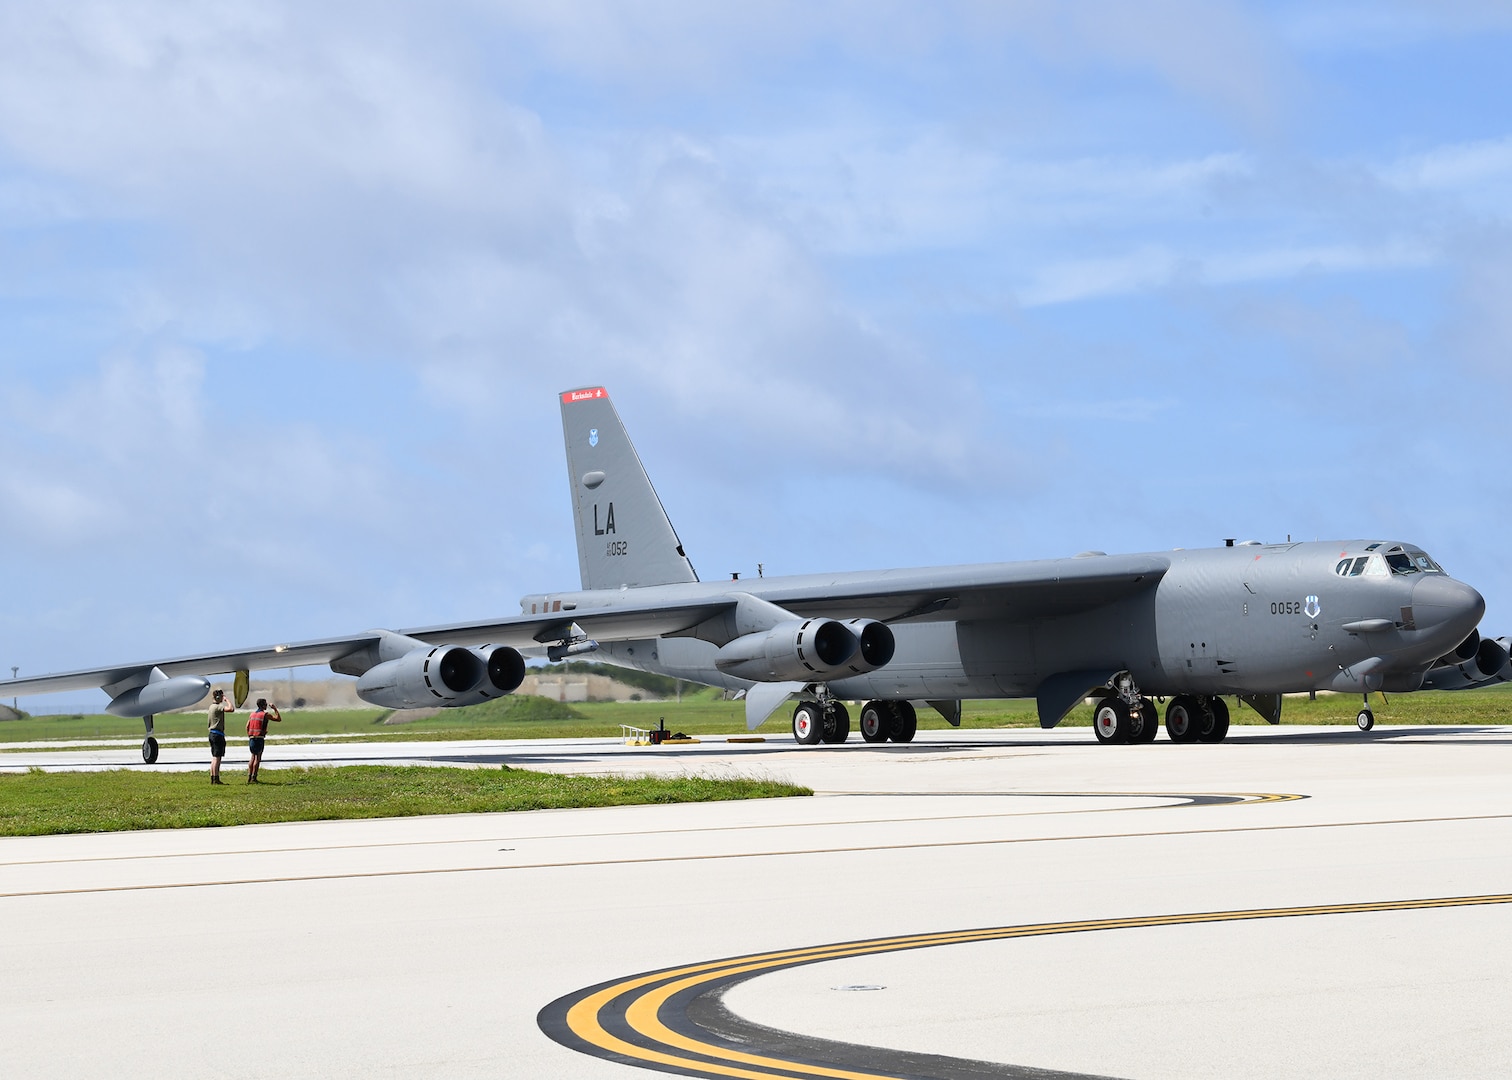 B-52 Stratofortress conducts joint training during Northern Edge 21